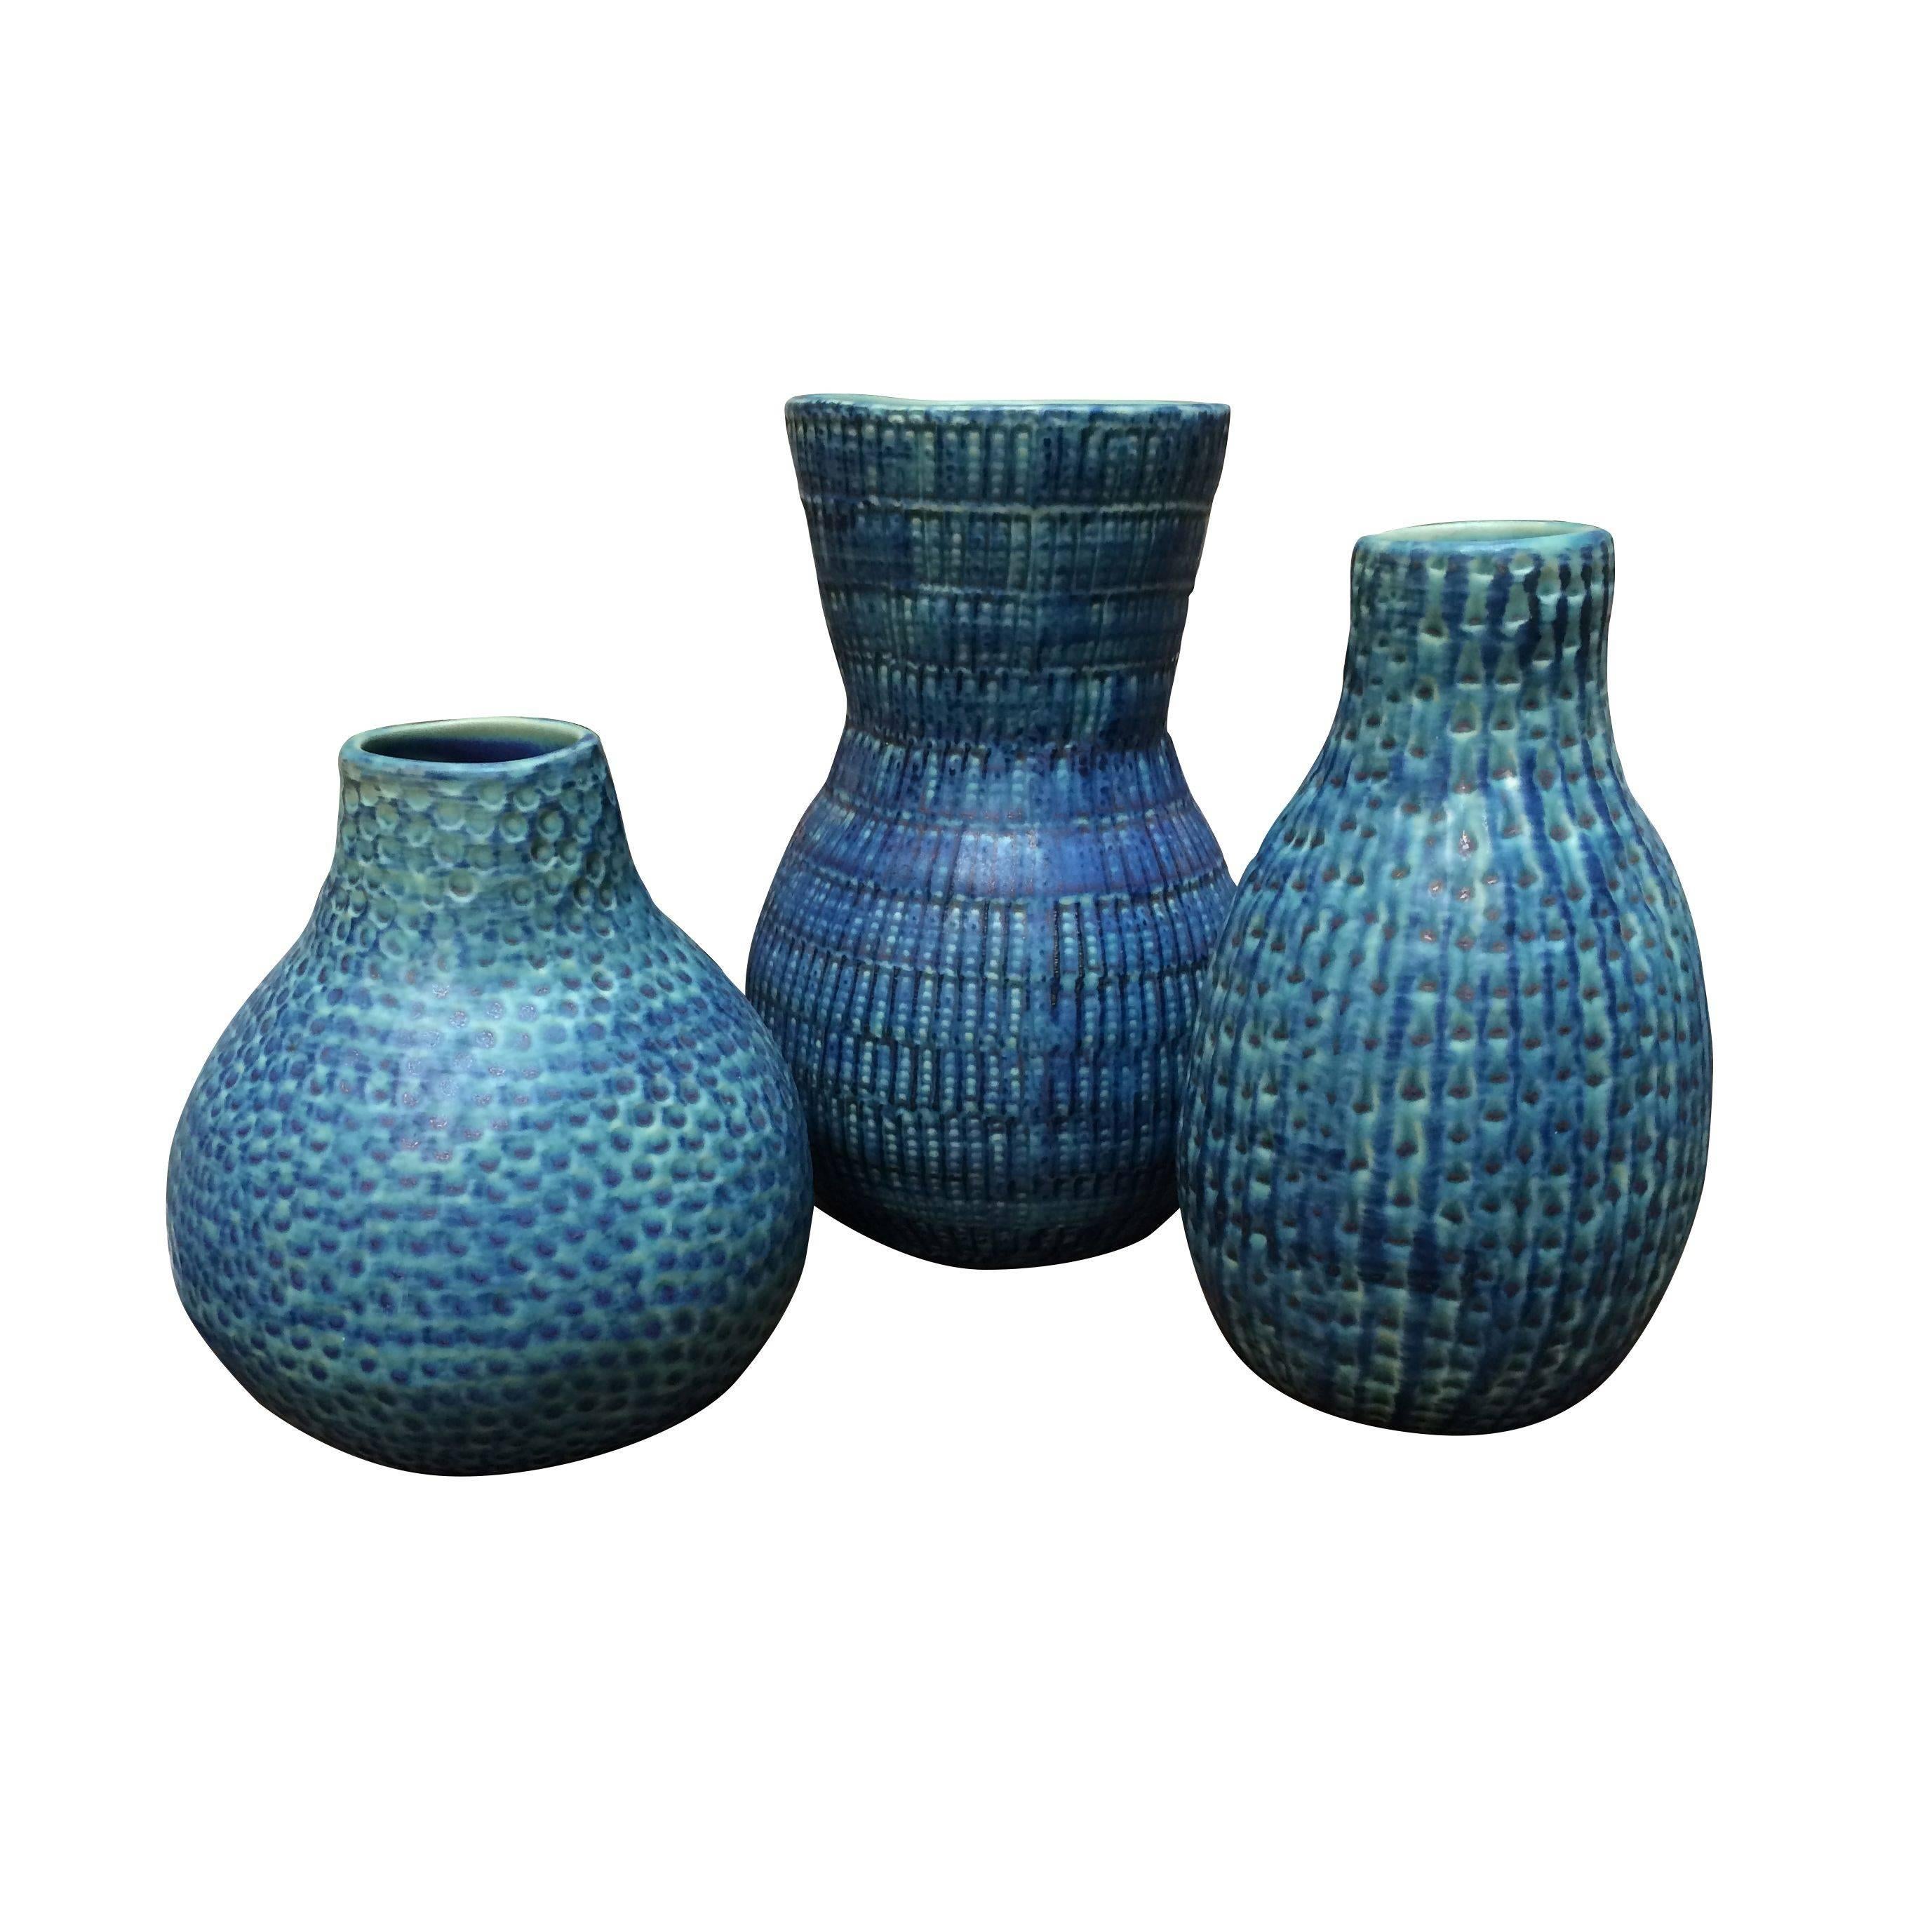 Contemporary ribbed and textured shades of washed turquoise vase.
Works well with S4534 and S4636.
ARRIVING AUGUST